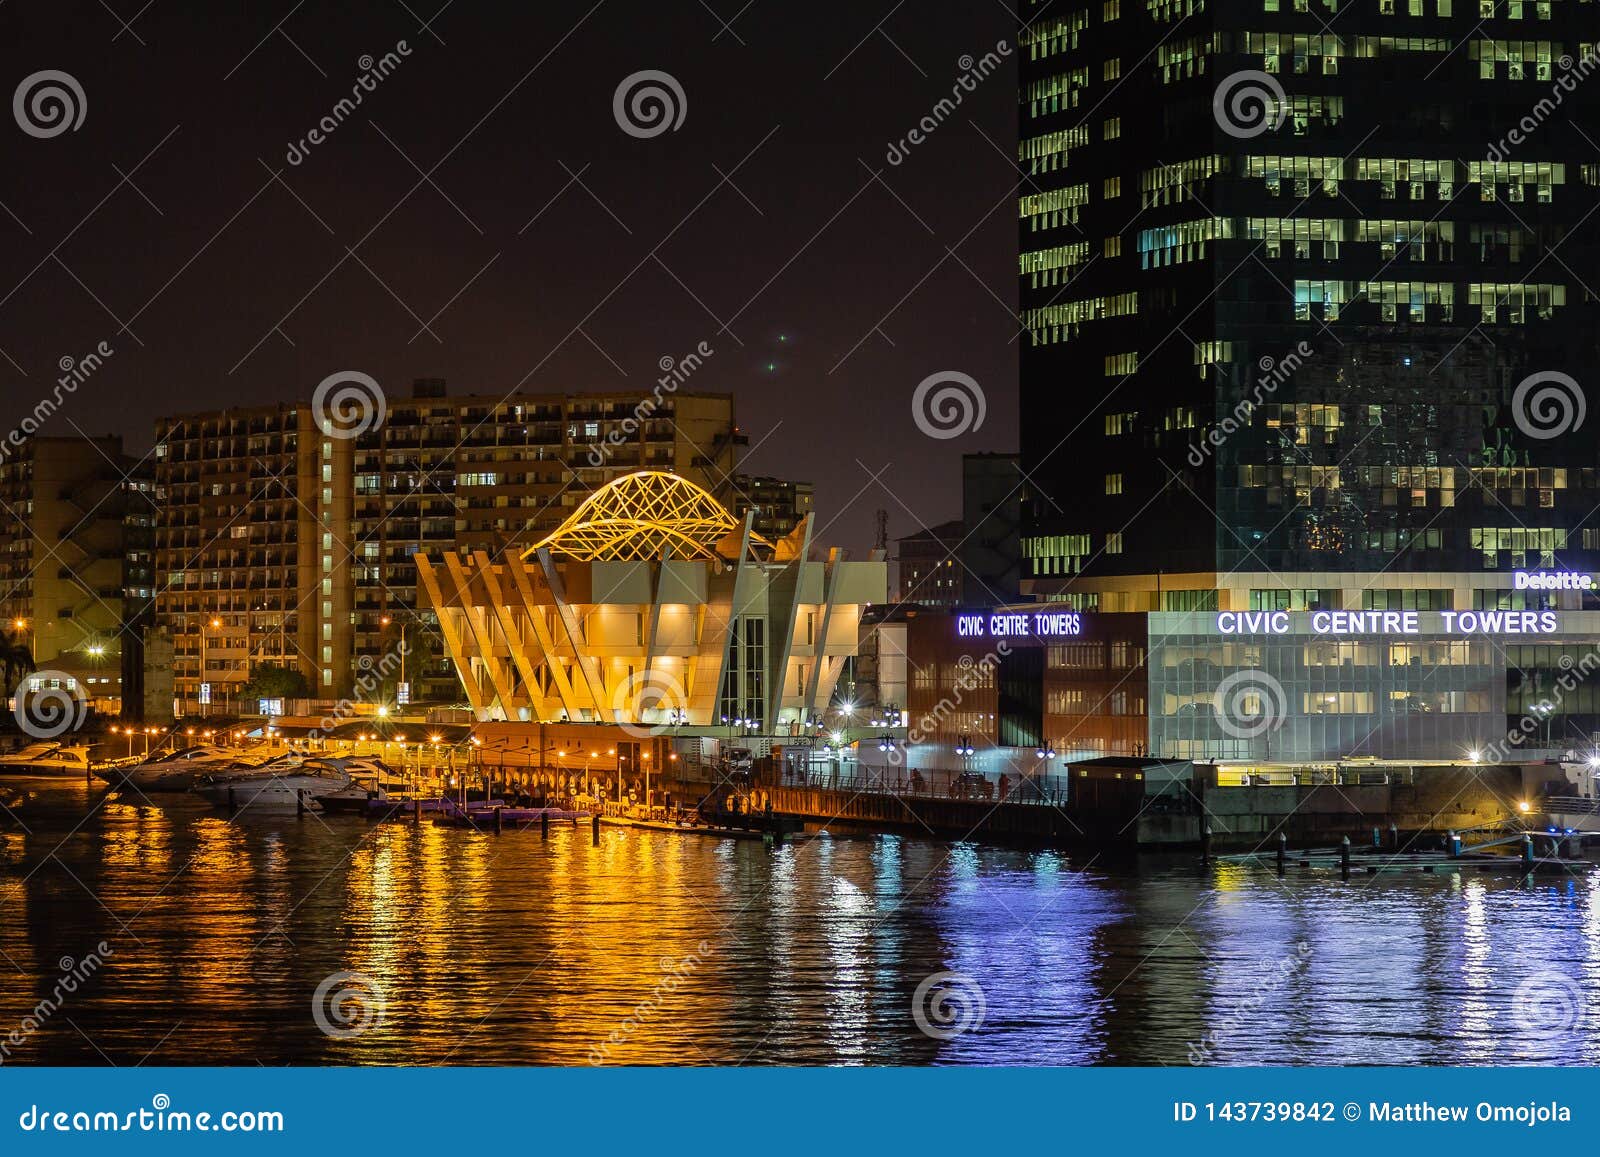 night scene of close up view of the civic center towers victoria island, lagos nigeria